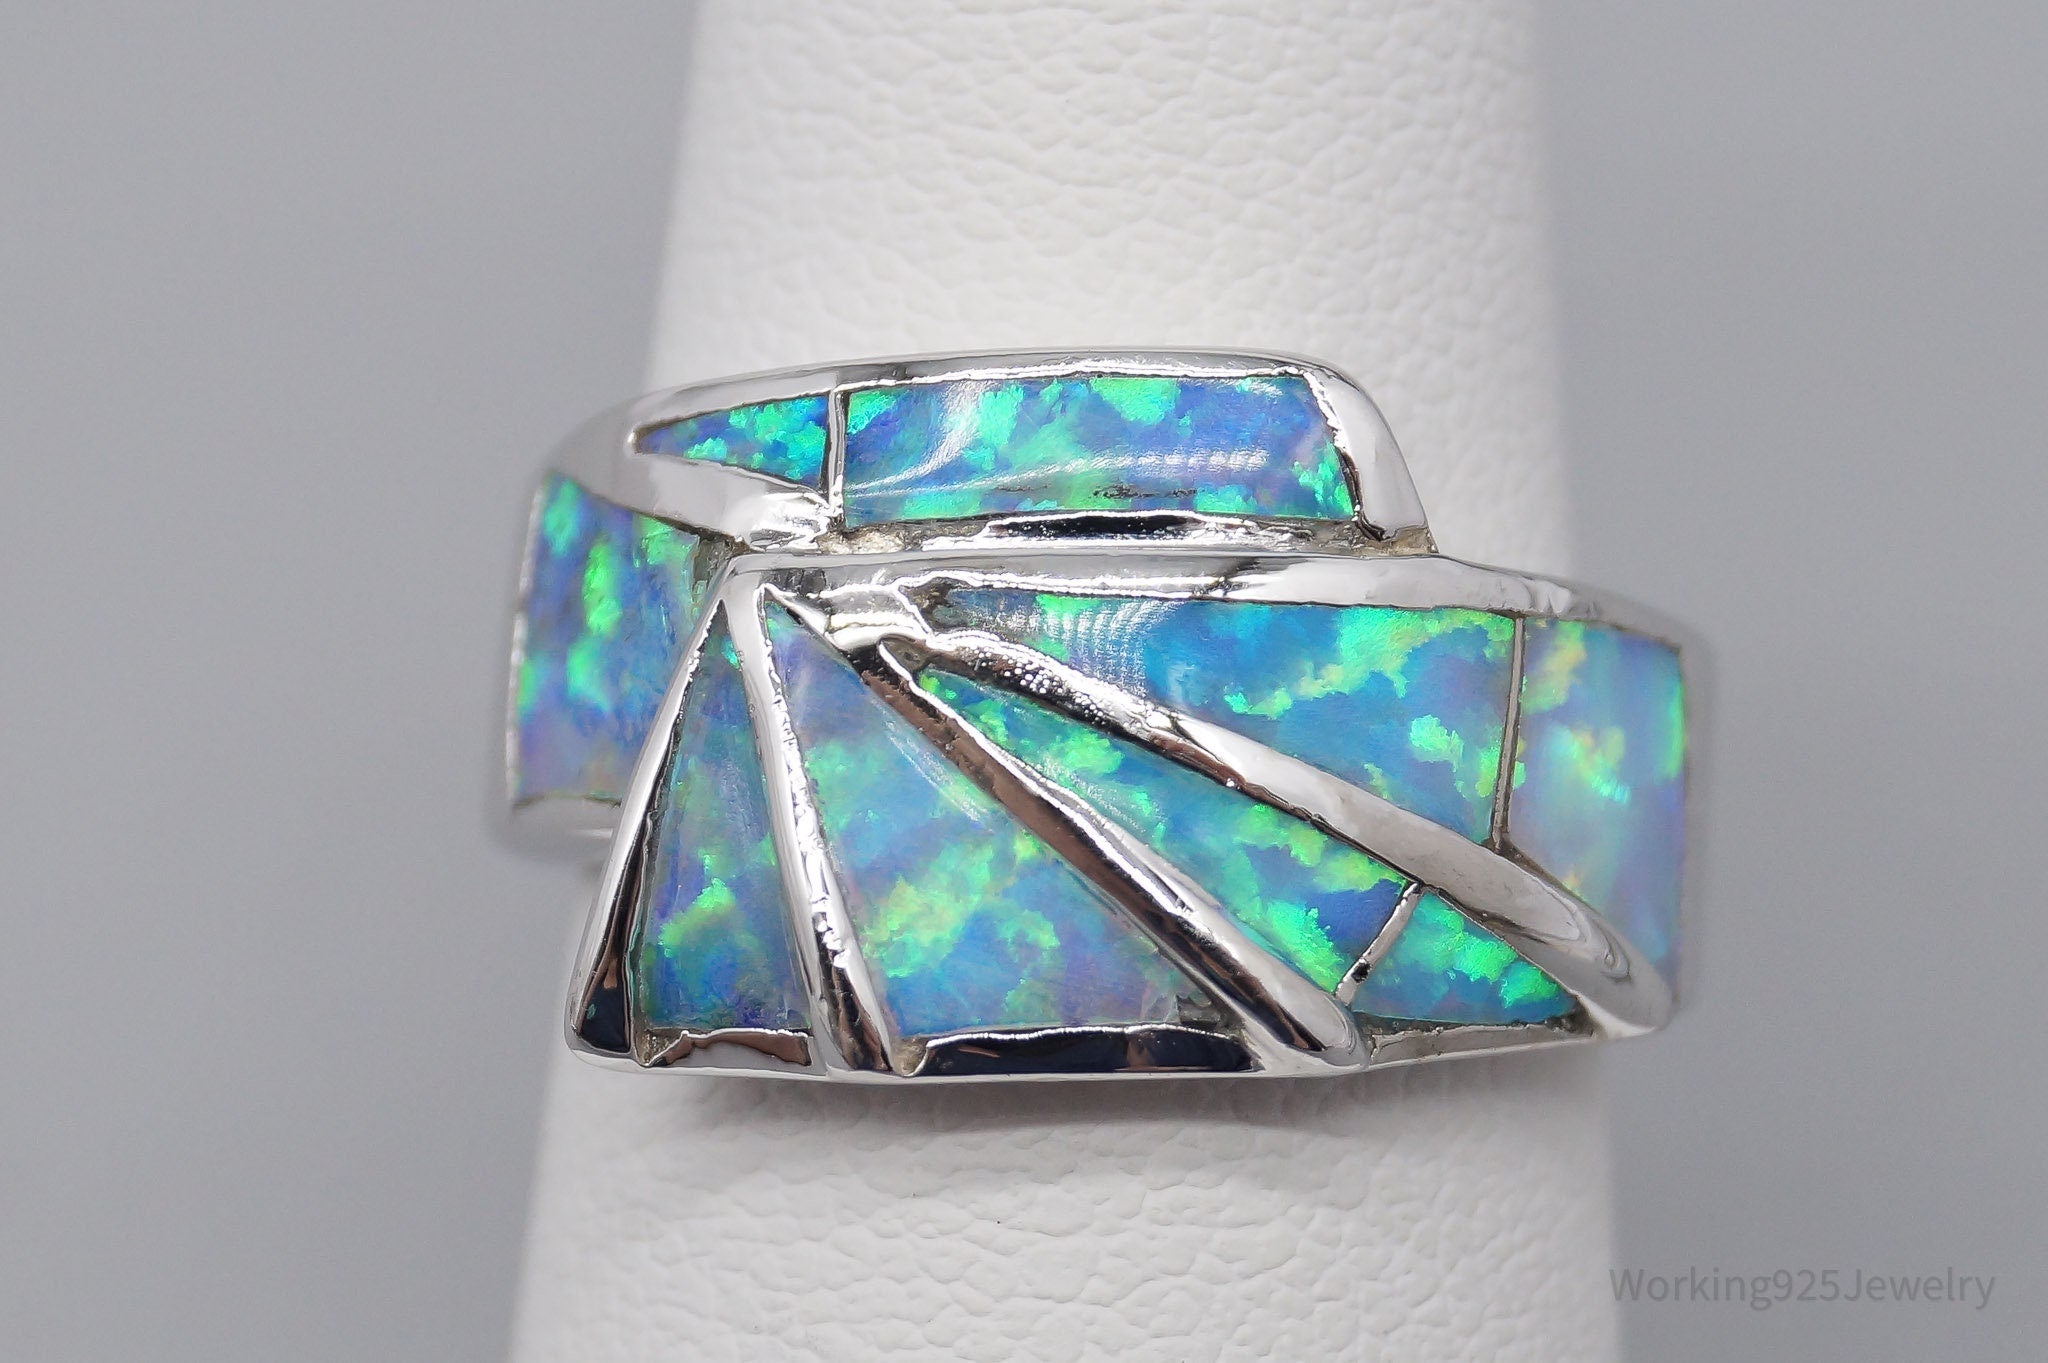 Vintage Blue Opal Inlay Sterling Silver Ring - Size 5.75